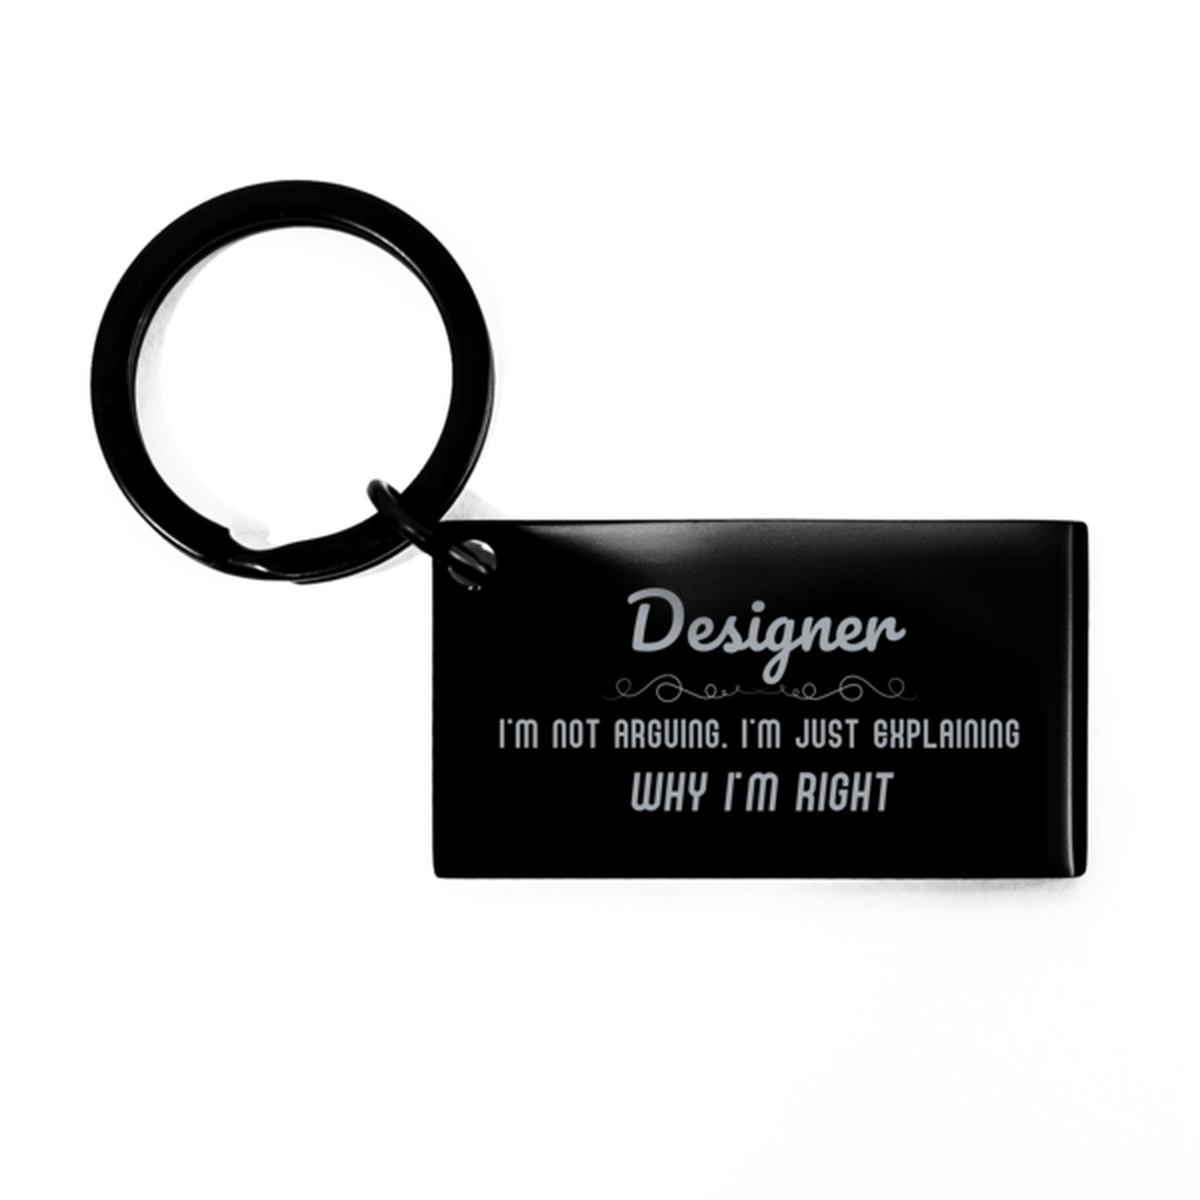 Designer I'm not Arguing. I'm Just Explaining Why I'm RIGHT Keychain, Funny Saying Quote Designer Gifts For Designer Graduation Birthday Christmas Gifts for Men Women Coworker